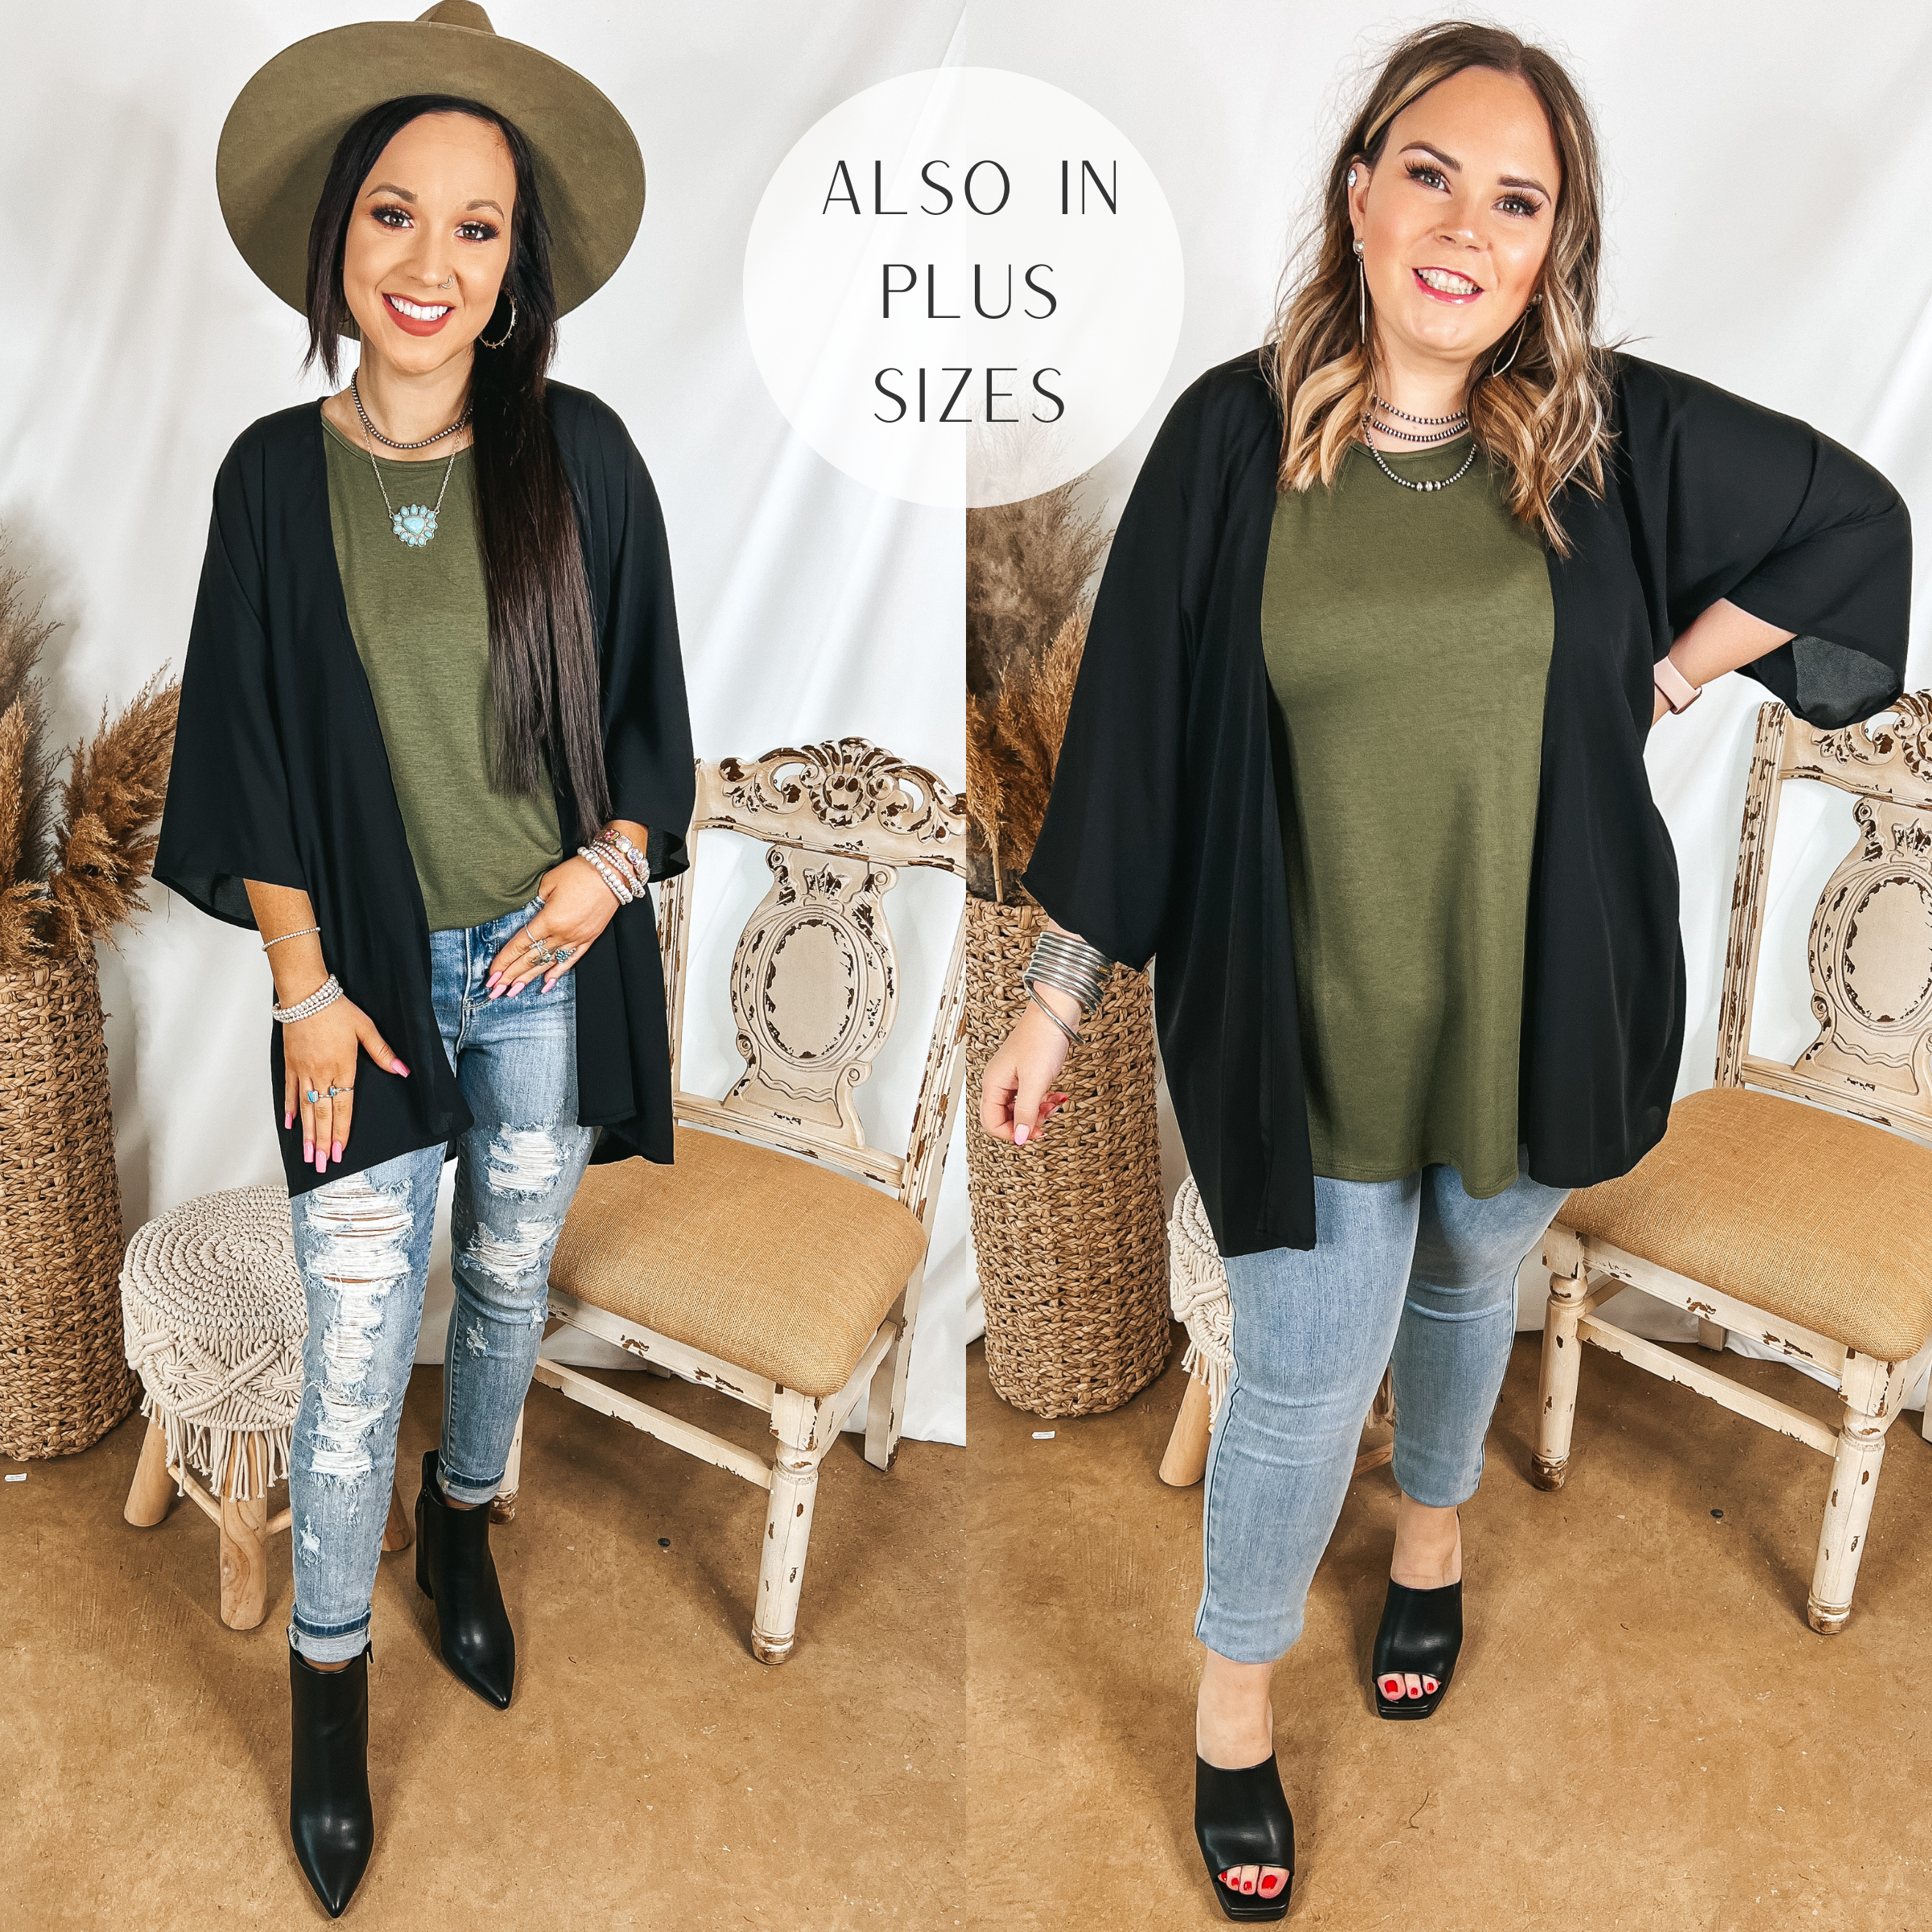 Models are wearing a black kimono over an olive tank top. Both models have it paired with light wash jeans and black shoes. Size small model has on an olive felt hat.